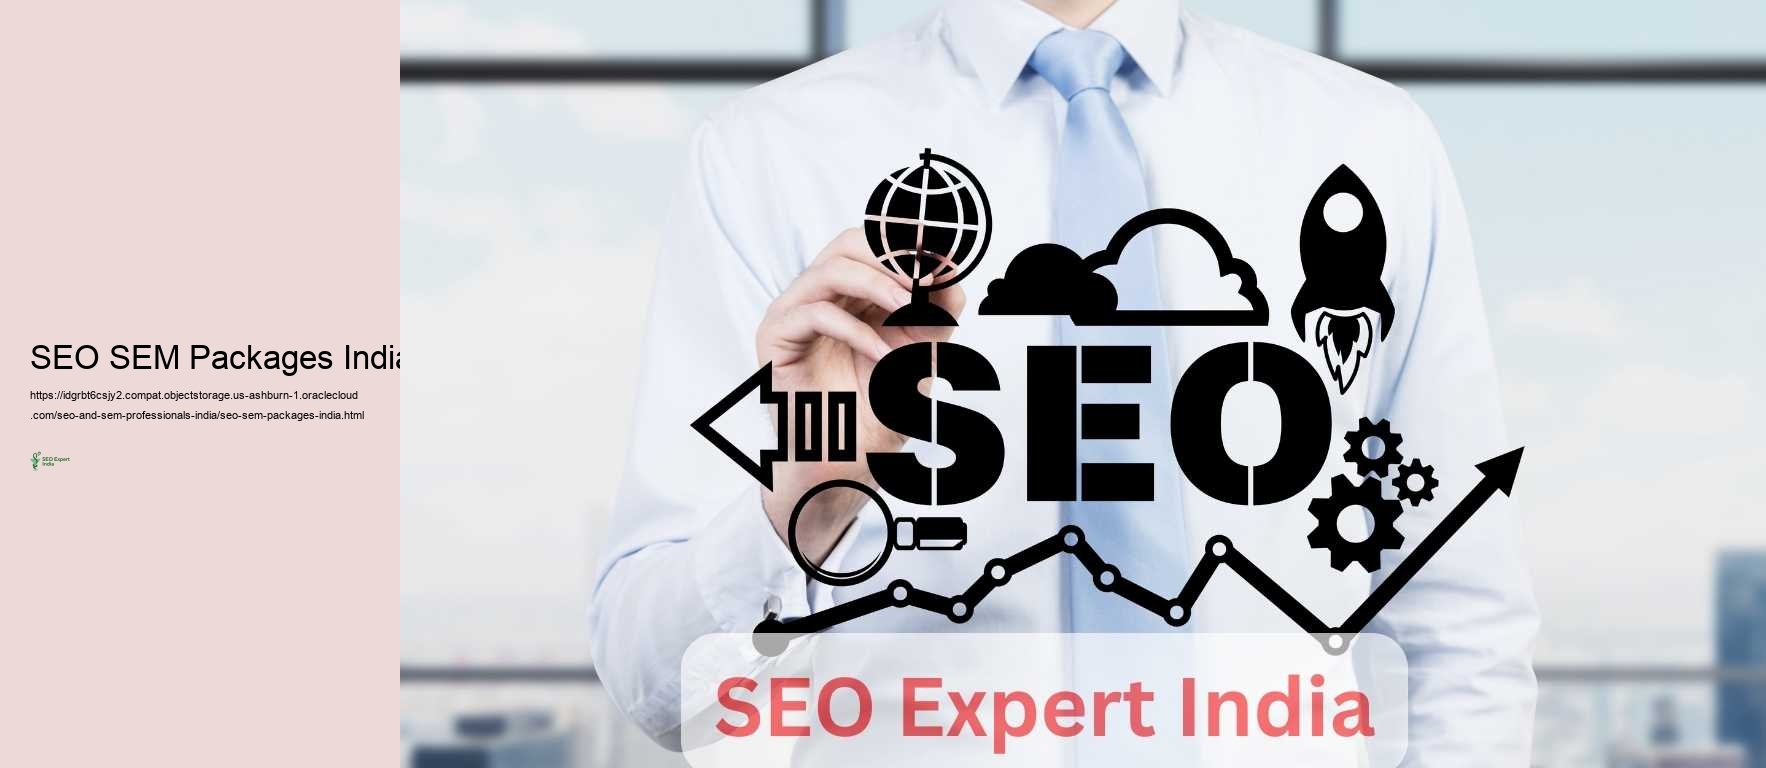 SEO SEM Packages India